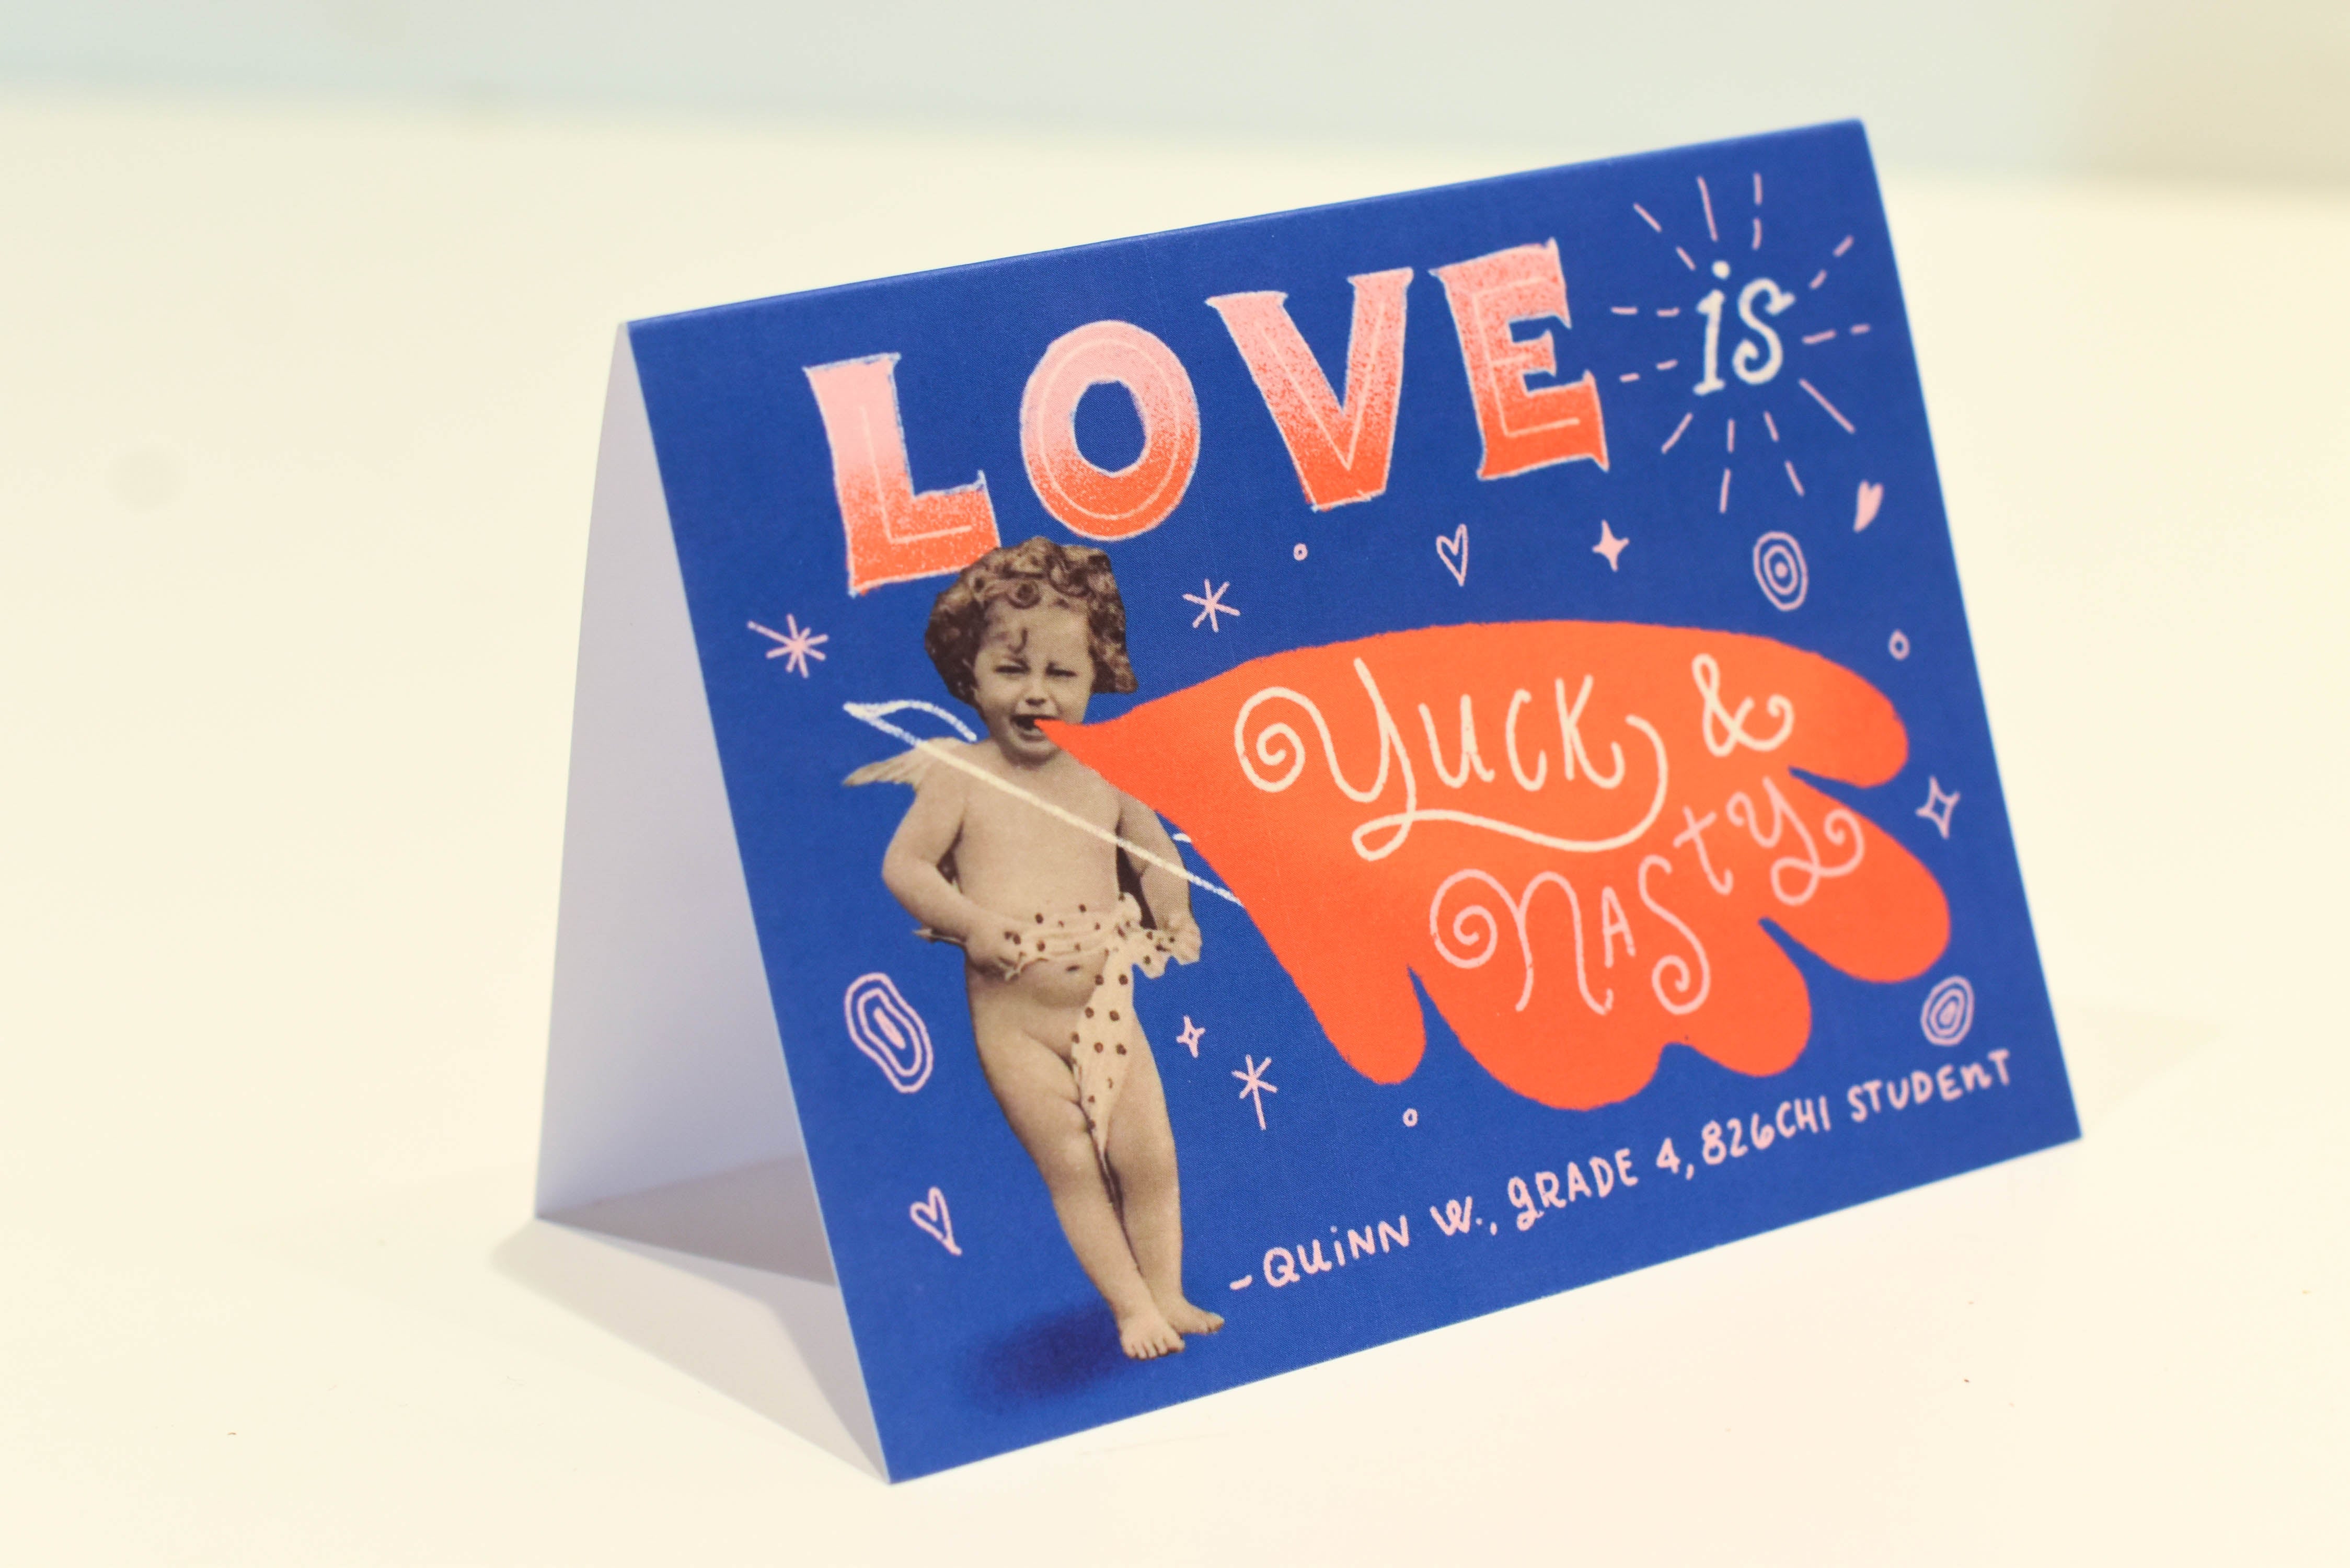 826CHI Card: "Love is yuck and nasty"